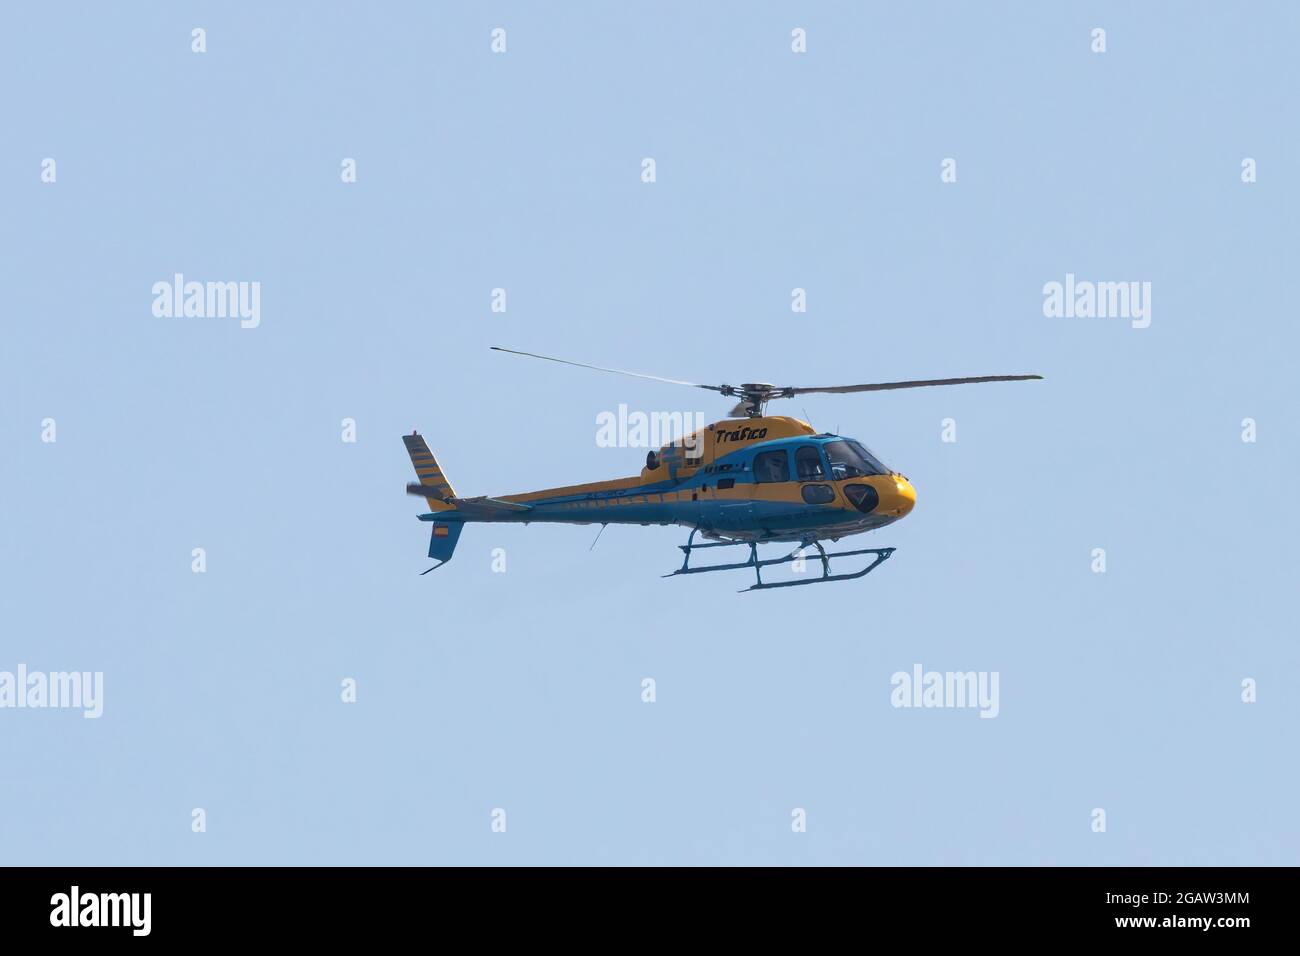 Huelva, Spain - July 30, 2021: Helicopter Pegasus  of the Guardia Civil de Trafico (Civil Traffic Guard) patrolling the roads and highways to control Stock Photo